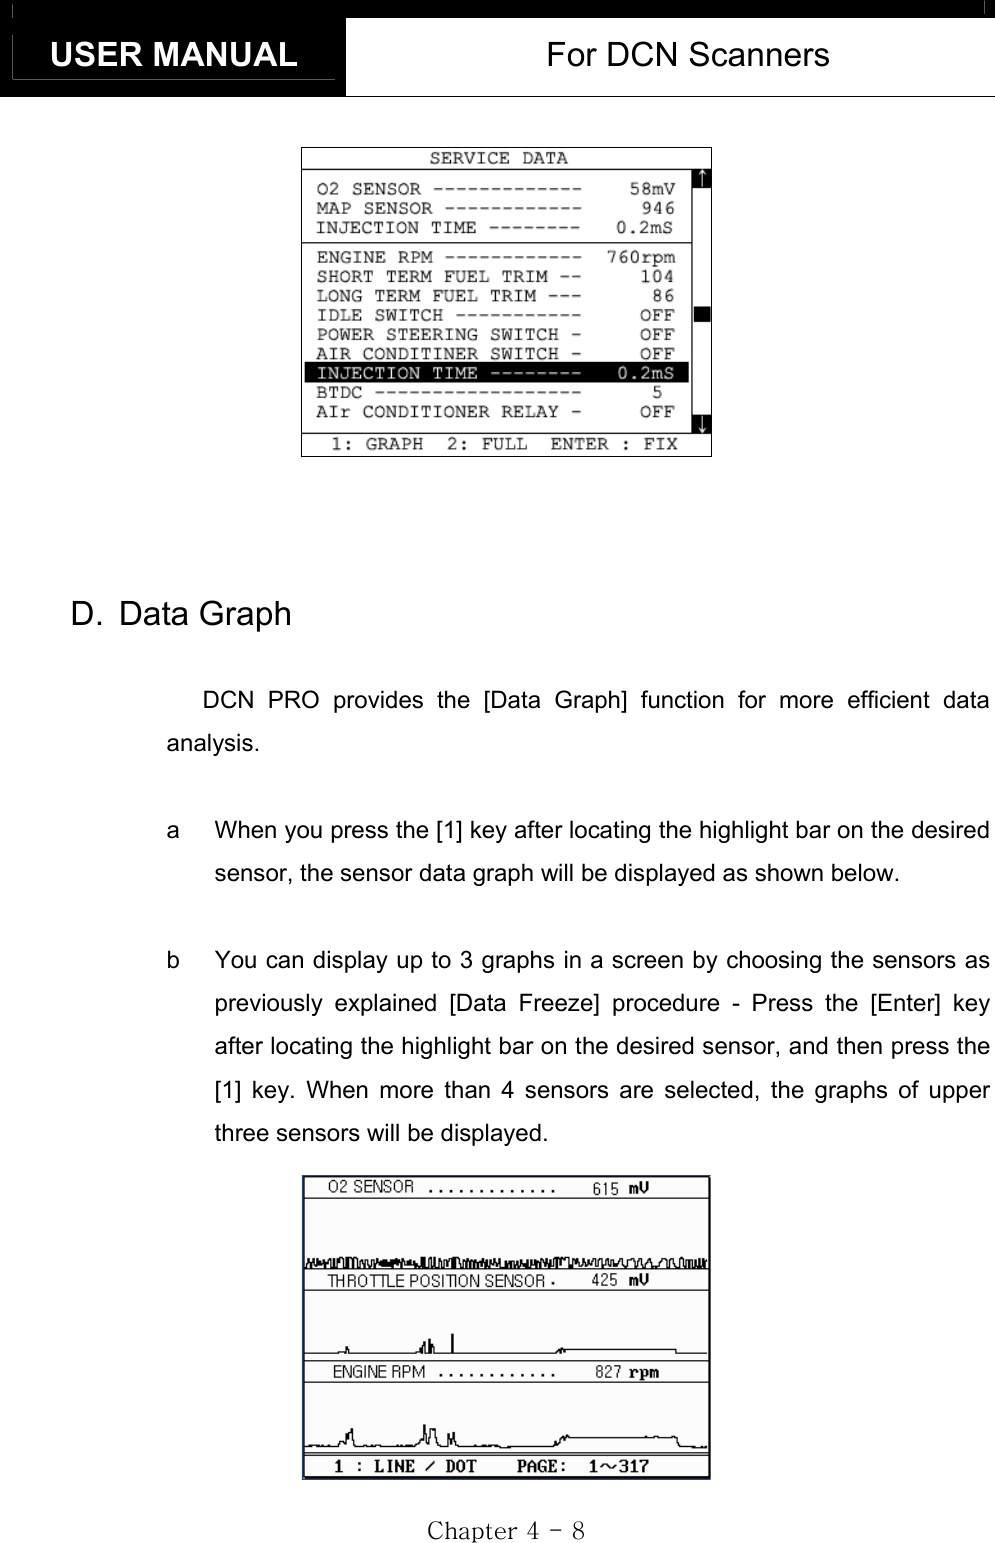 USER MANUAL  For DCN Scanners GjG[GTG_GD. Data Graph DCN PRO provides the [Data Graph] function for more efficient data analysis. a  When you press the [1] key after locating the highlight bar on the desired sensor, the sensor data graph will be displayed as shown below. b  You can display up to 3 graphs in a screen by choosing the sensors as previously explained [Data Freeze] procedure - Press the [Enter] key after locating the highlight bar on the desired sensor, and then press the [1] key. When more than 4 sensors are selected, the graphs of upper three sensors will be displayed. 